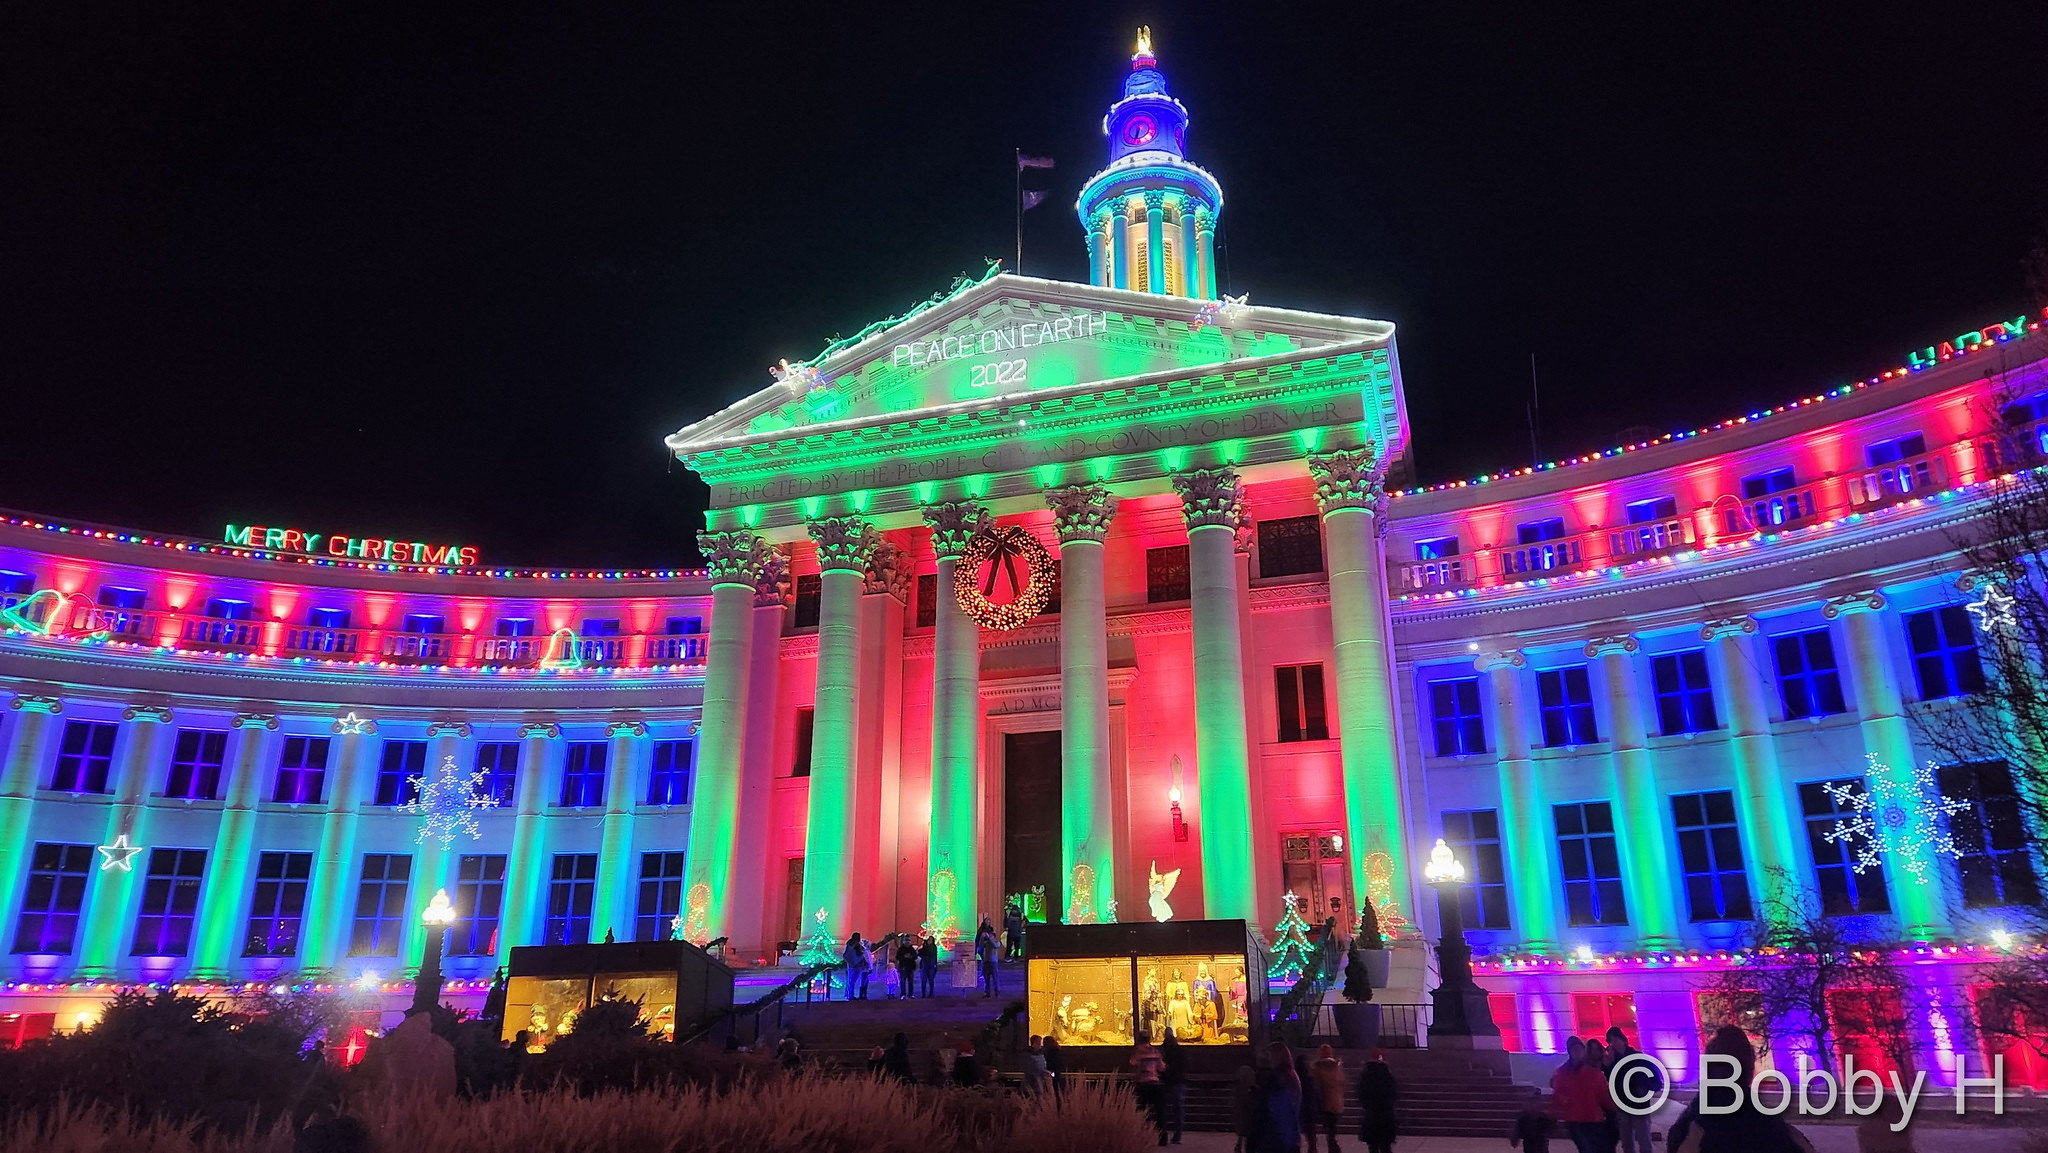 The Denver city and county building lit up for the holidays. (Bobby H)